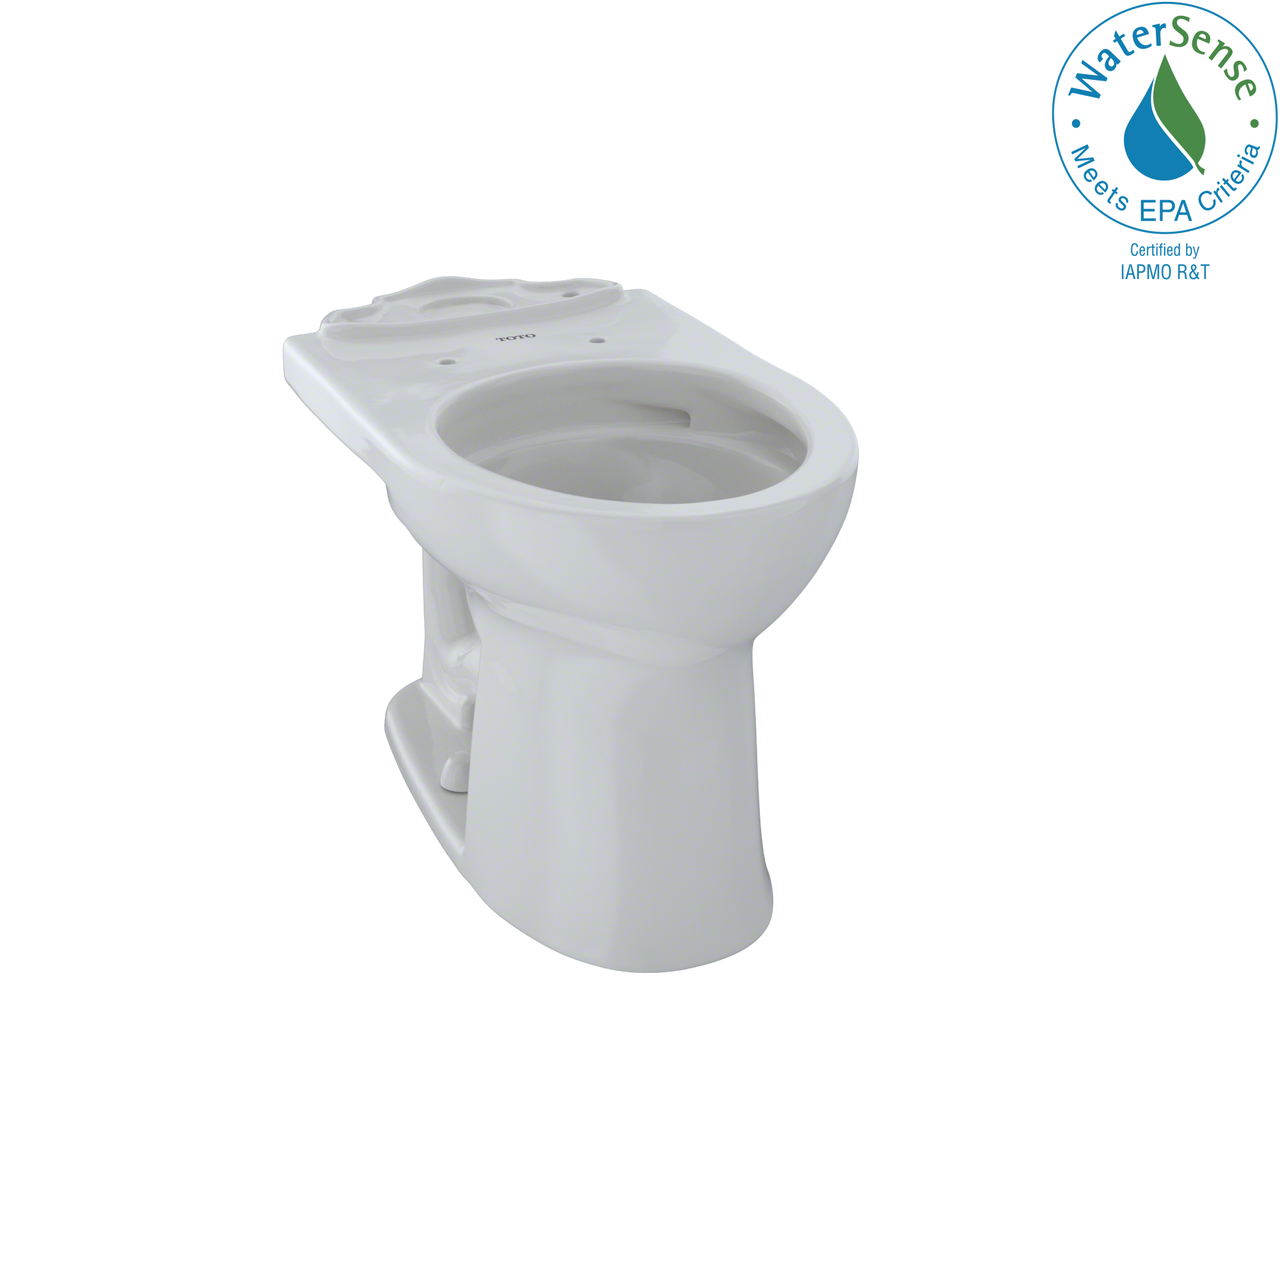 TOTO Drake II Universal Height Round Toilet Bowl with CeFiONtect,   - CST453CEFG#11 - BNGBath